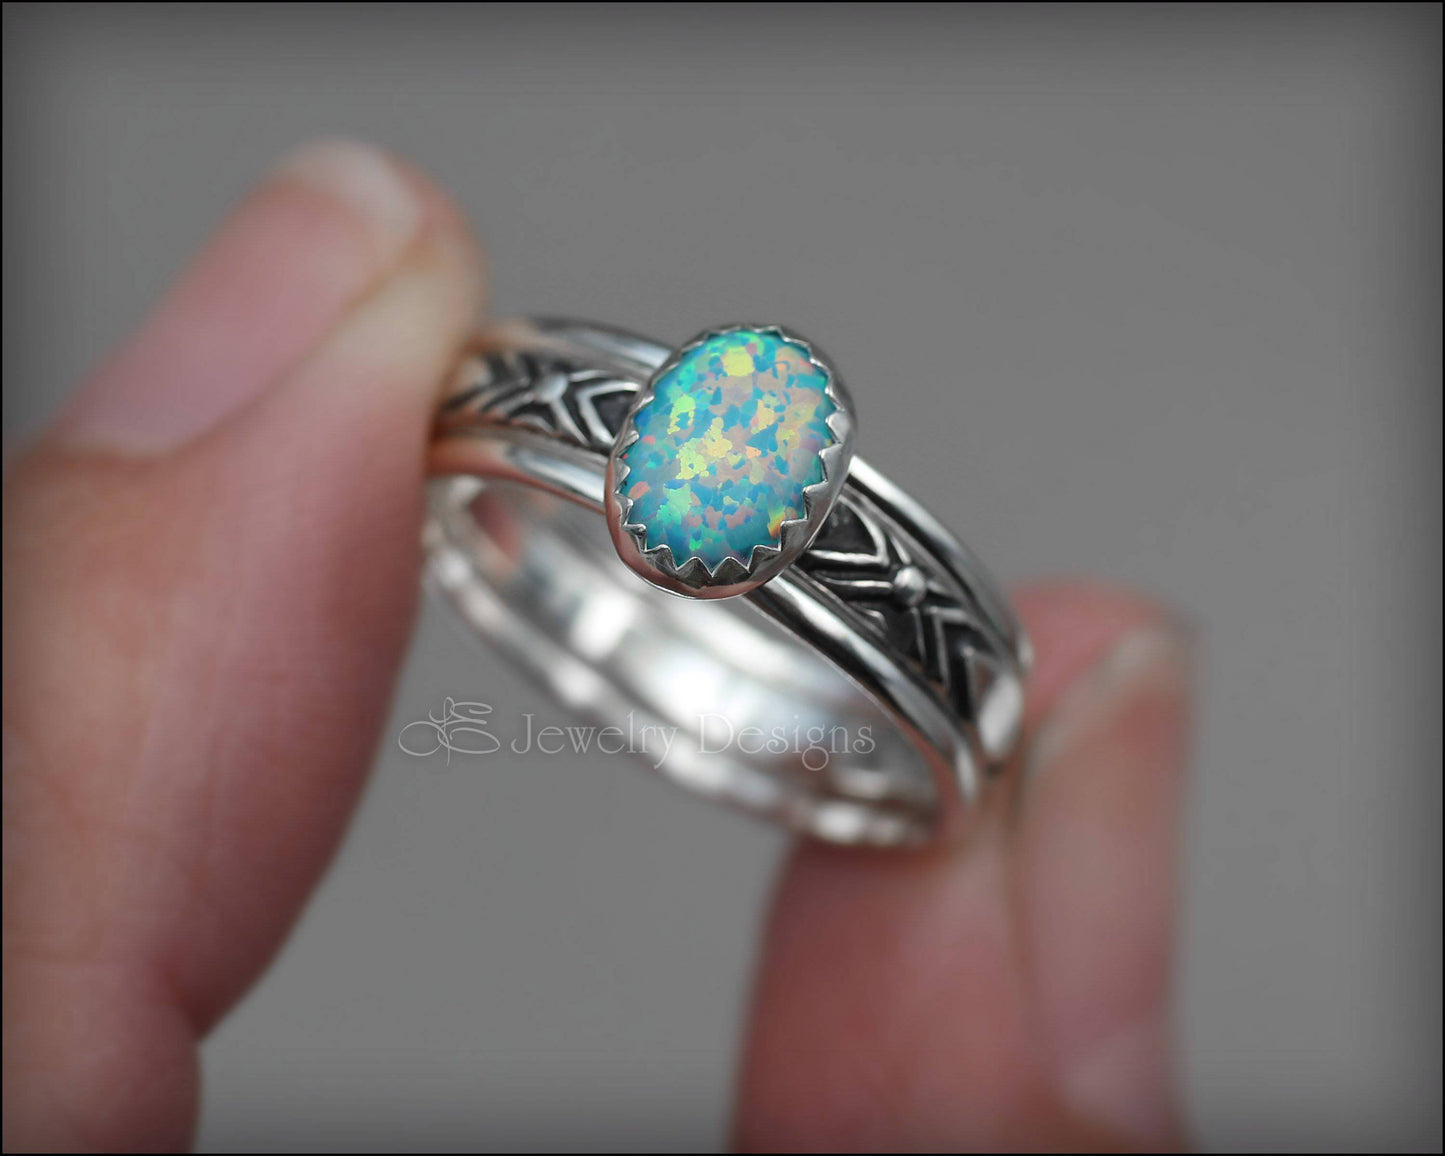 Load image into Gallery viewer, Oval Opal Ring Set - (choose color) - LE Jewelry Designs
